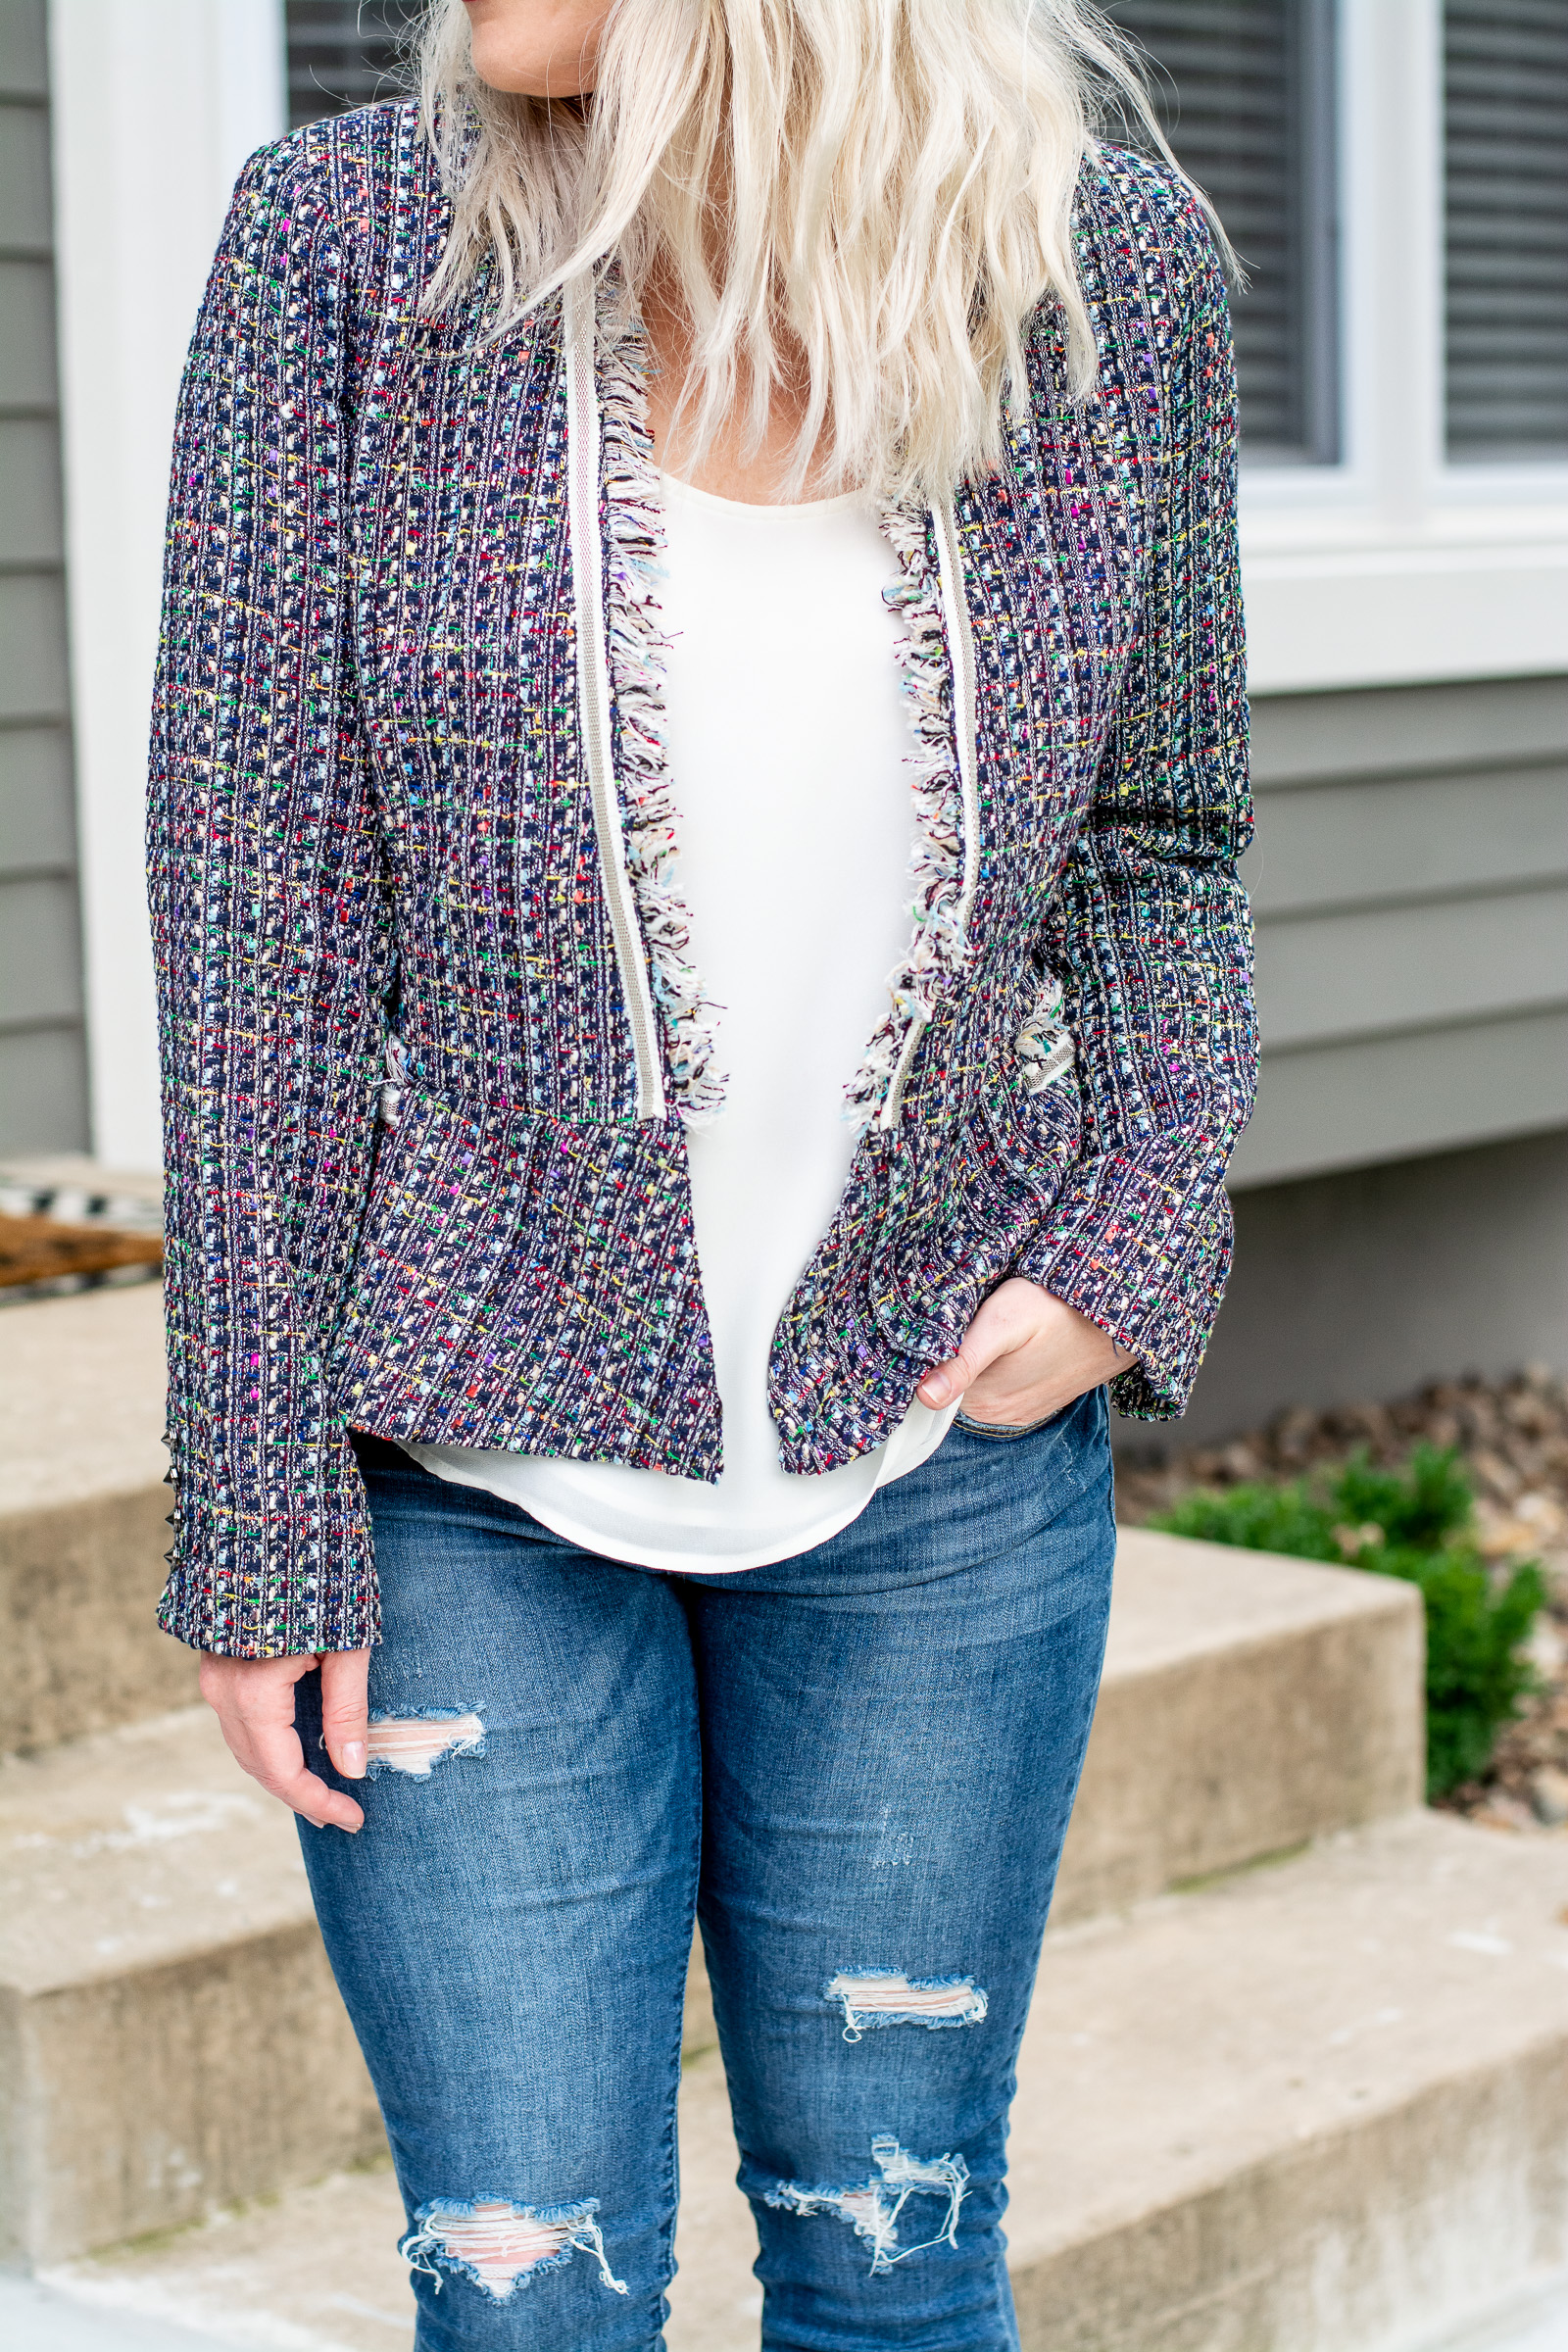 A Tweed Jacket for Fall. | LSR